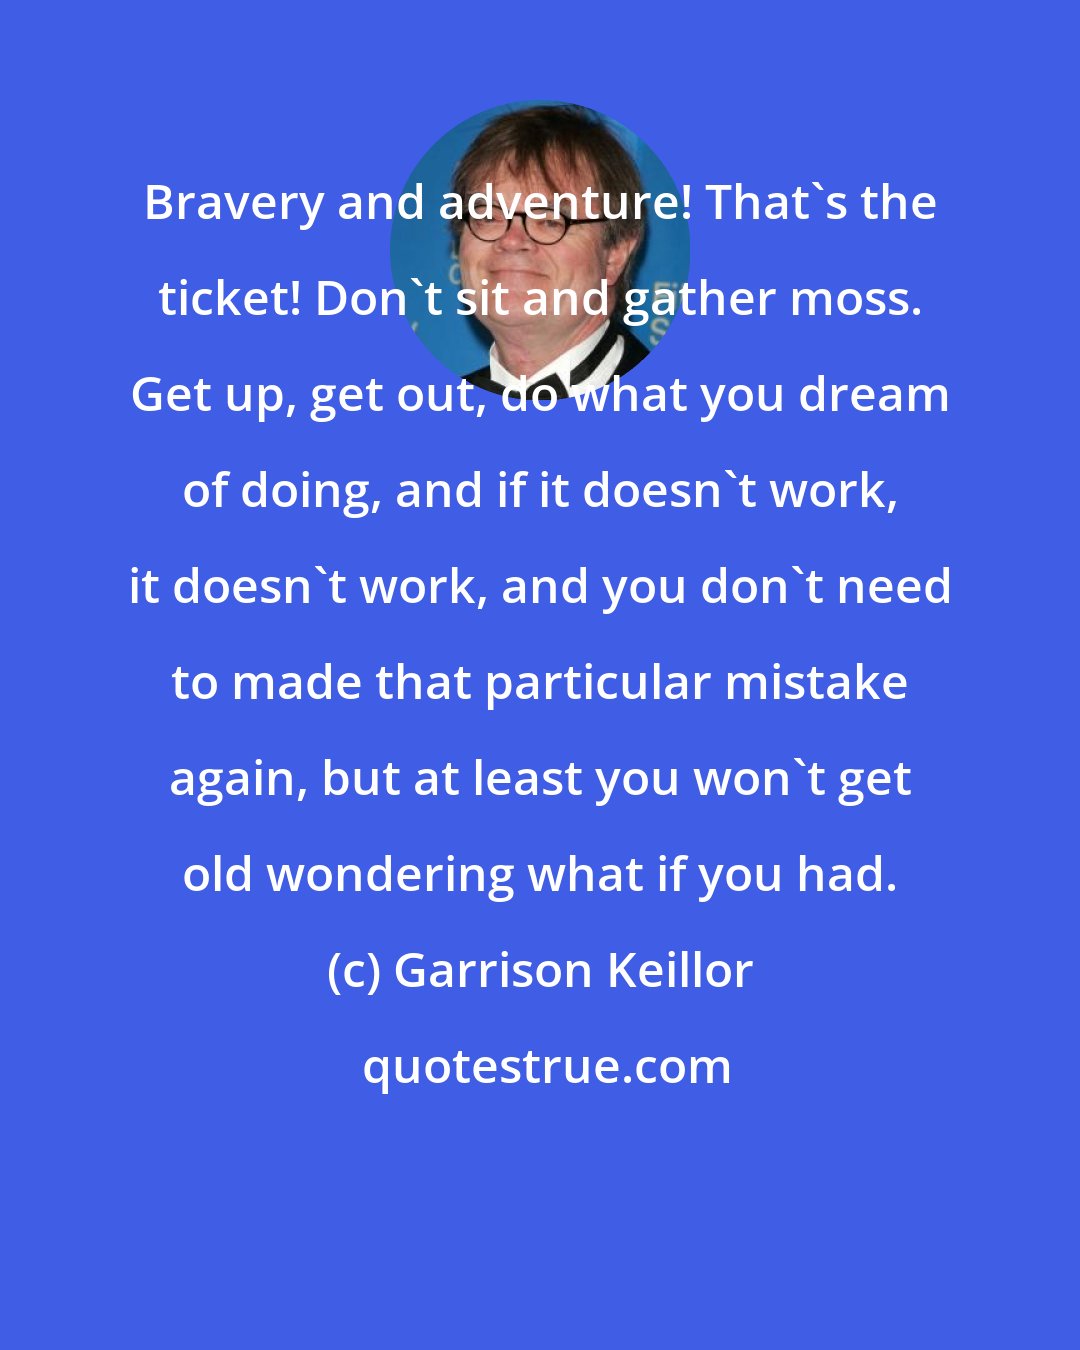 Garrison Keillor: Bravery and adventure! That's the ticket! Don't sit and gather moss. Get up, get out, do what you dream of doing, and if it doesn't work, it doesn't work, and you don't need to made that particular mistake again, but at least you won't get old wondering what if you had.